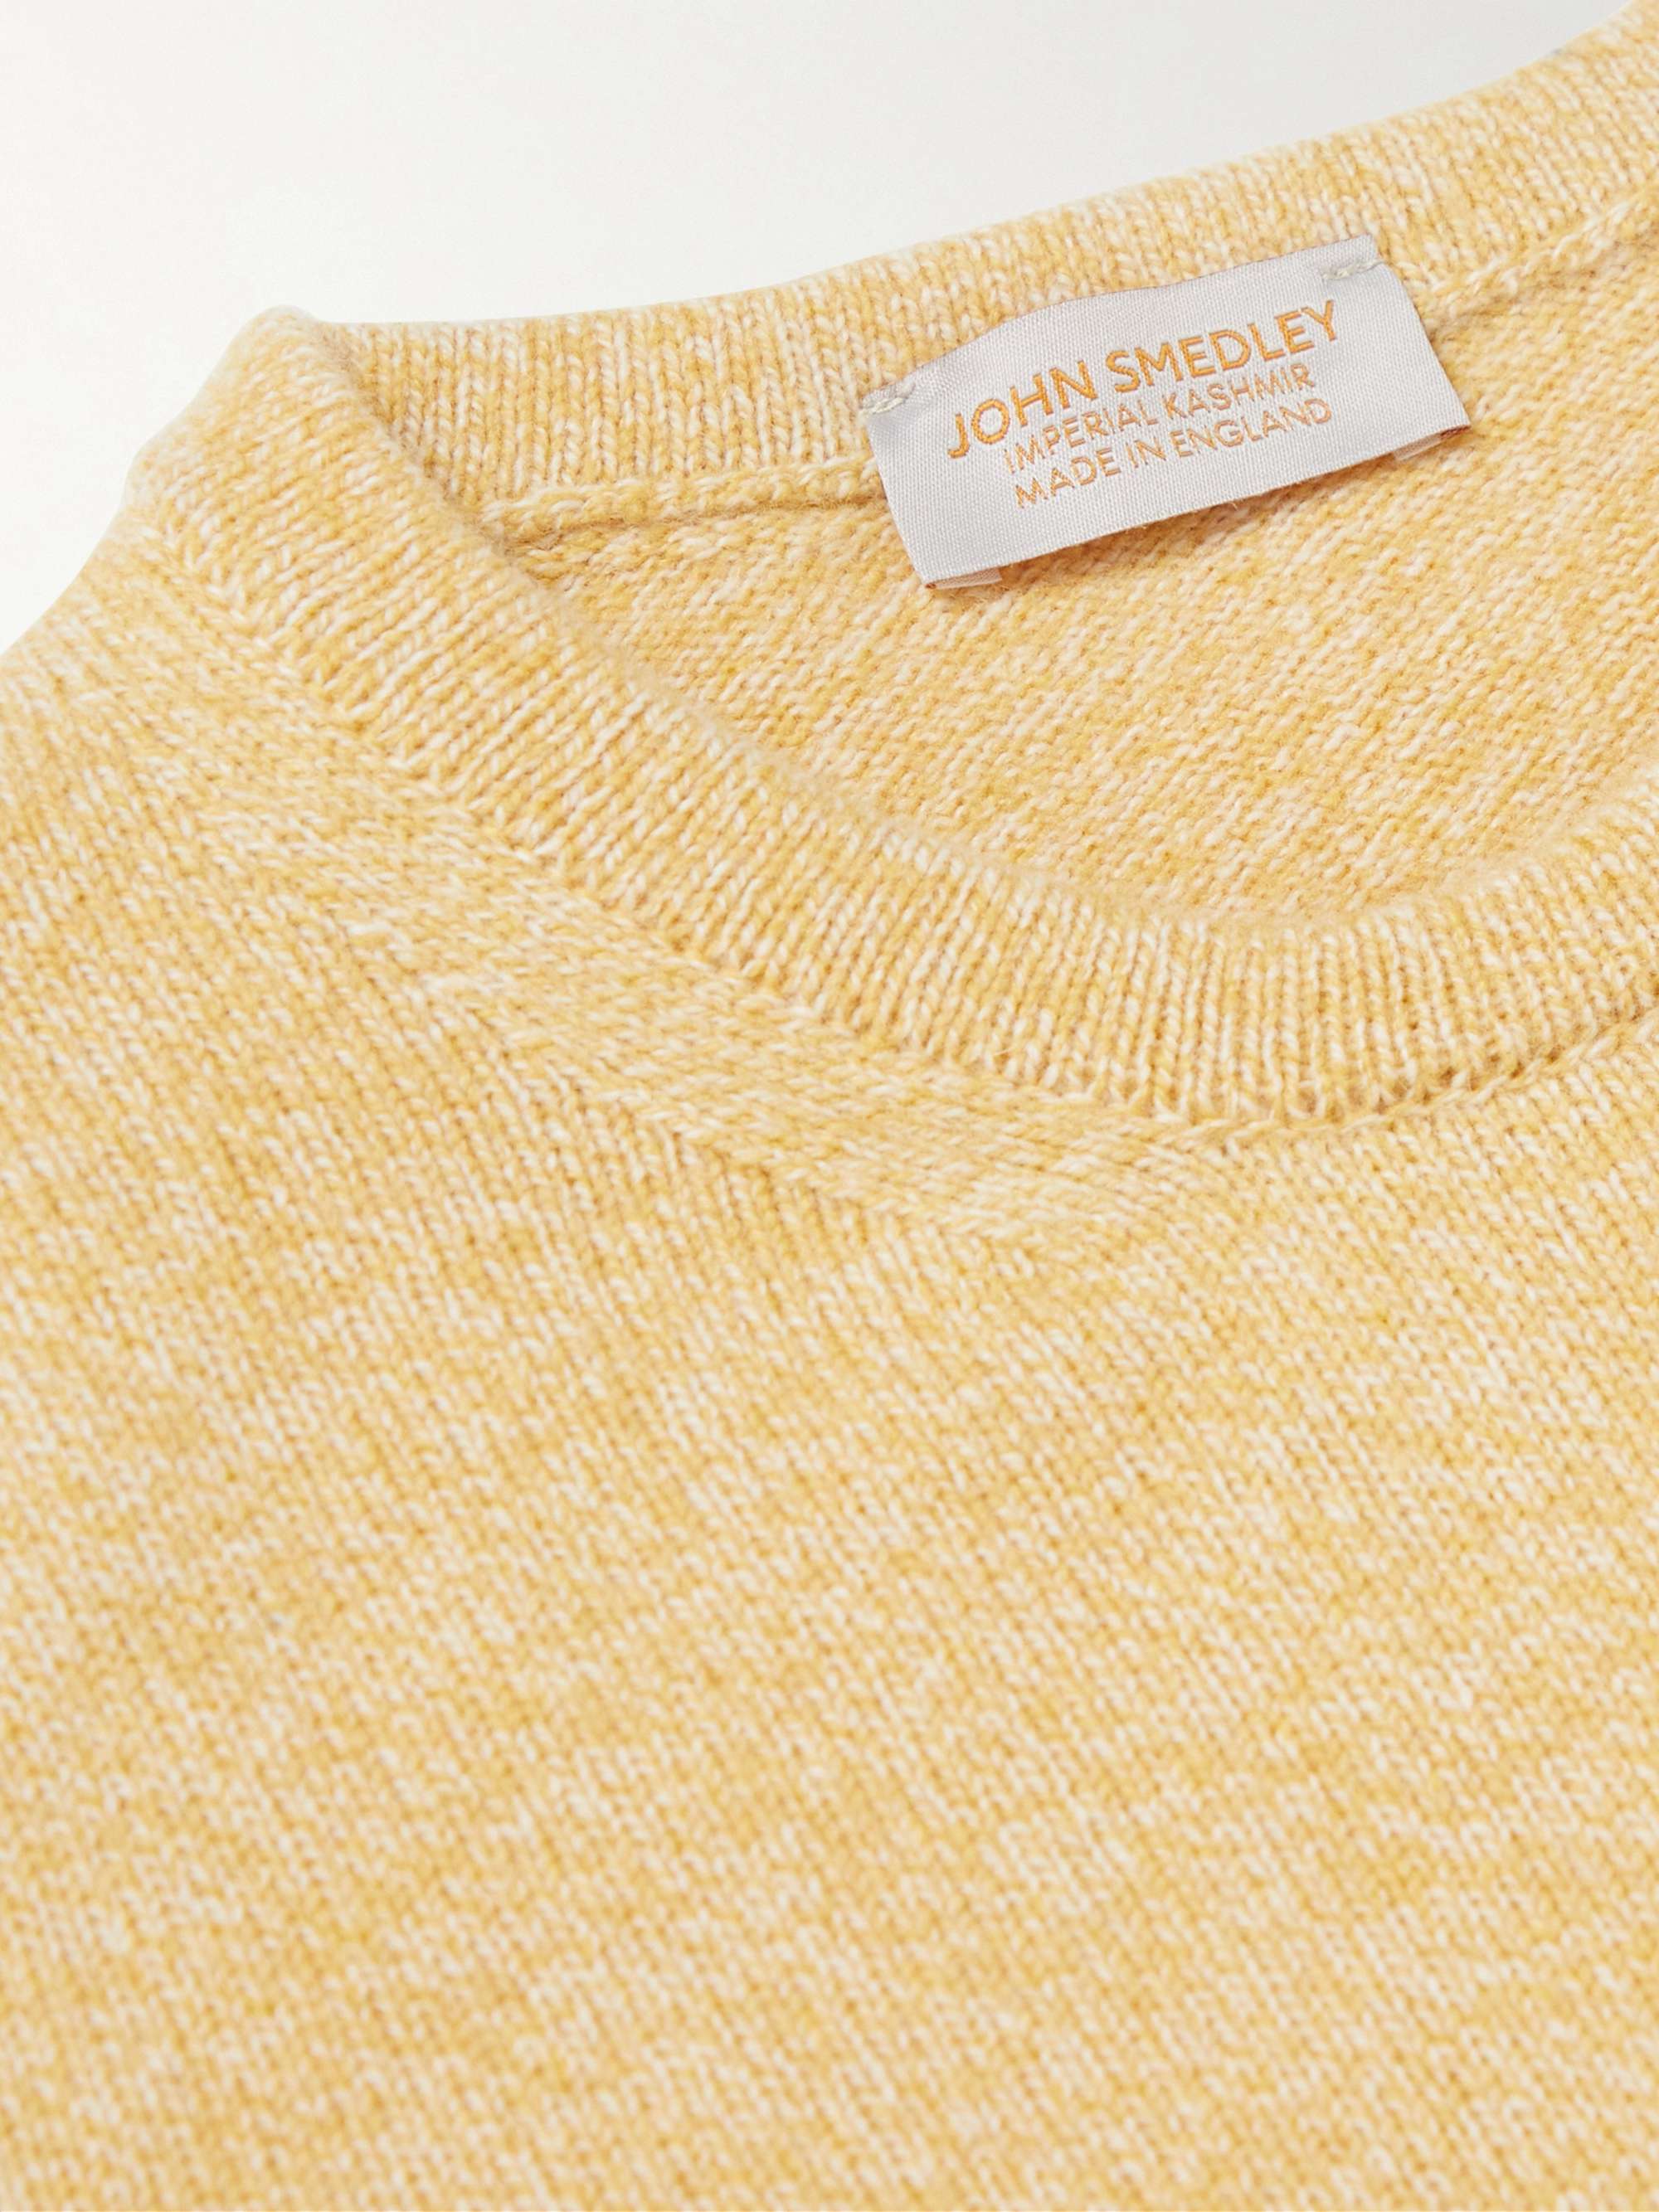 JOHN SMEDLEY Niko Slim-Fit Recycled Cashmere and Merino Wool-Blend Sweater